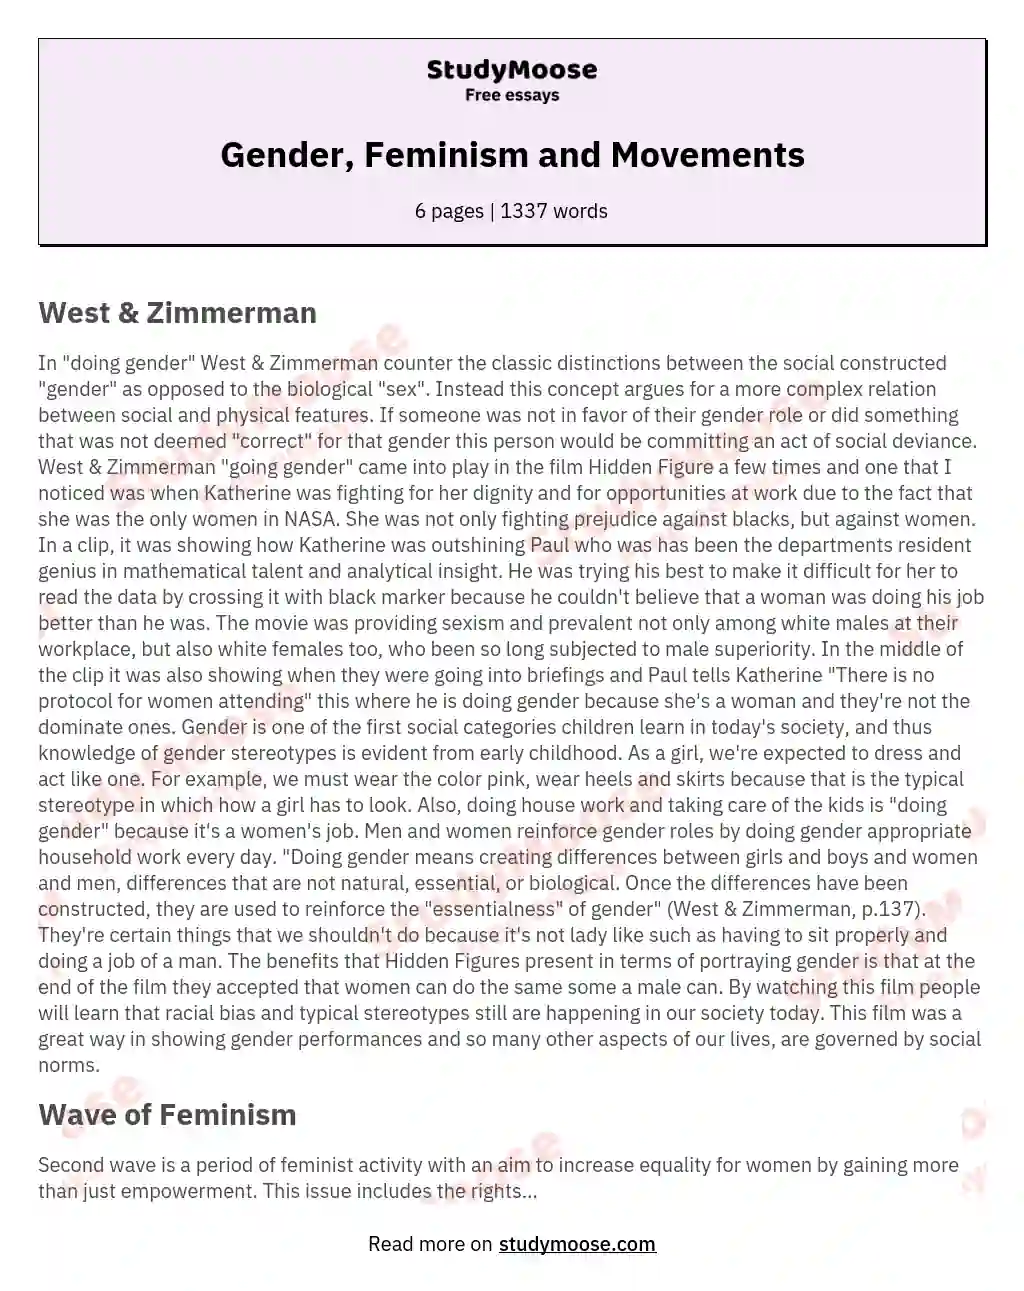 Gender, Feminism and Movements essay